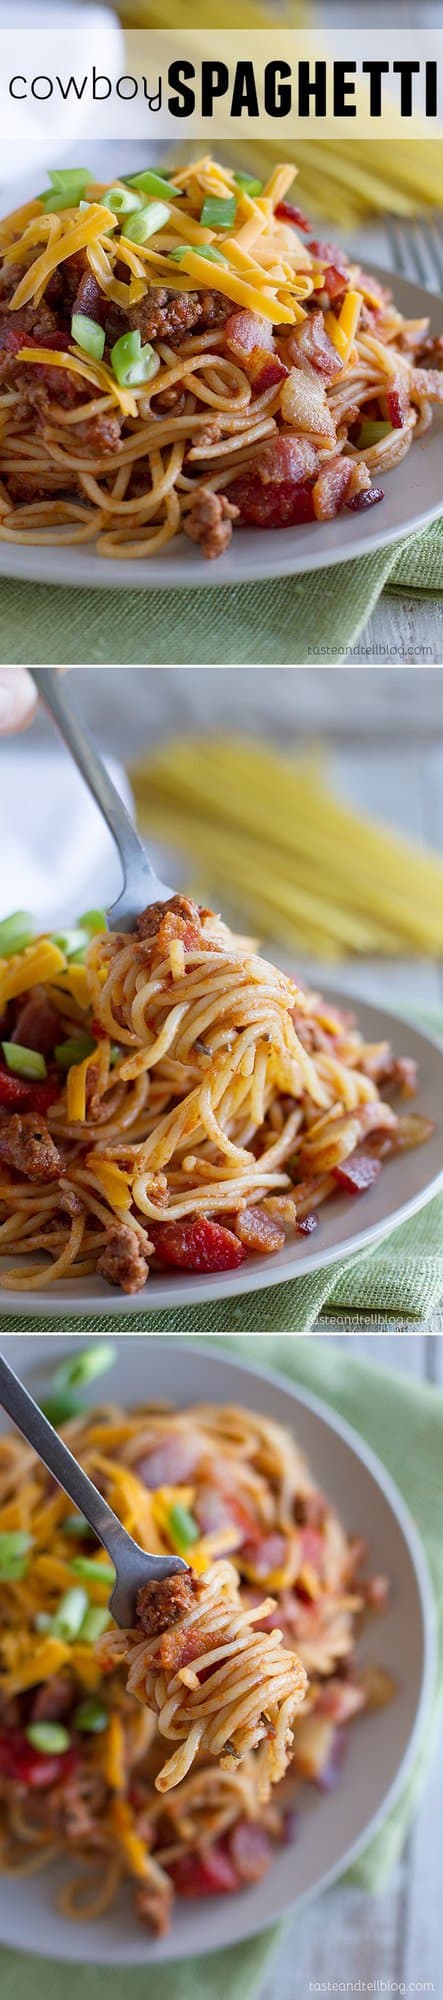 A change up from traditional Italian spaghetti and meat sauce, this Cowboy Spaghetti adds in bacon and cheddar cheese for an American twist on a classic.